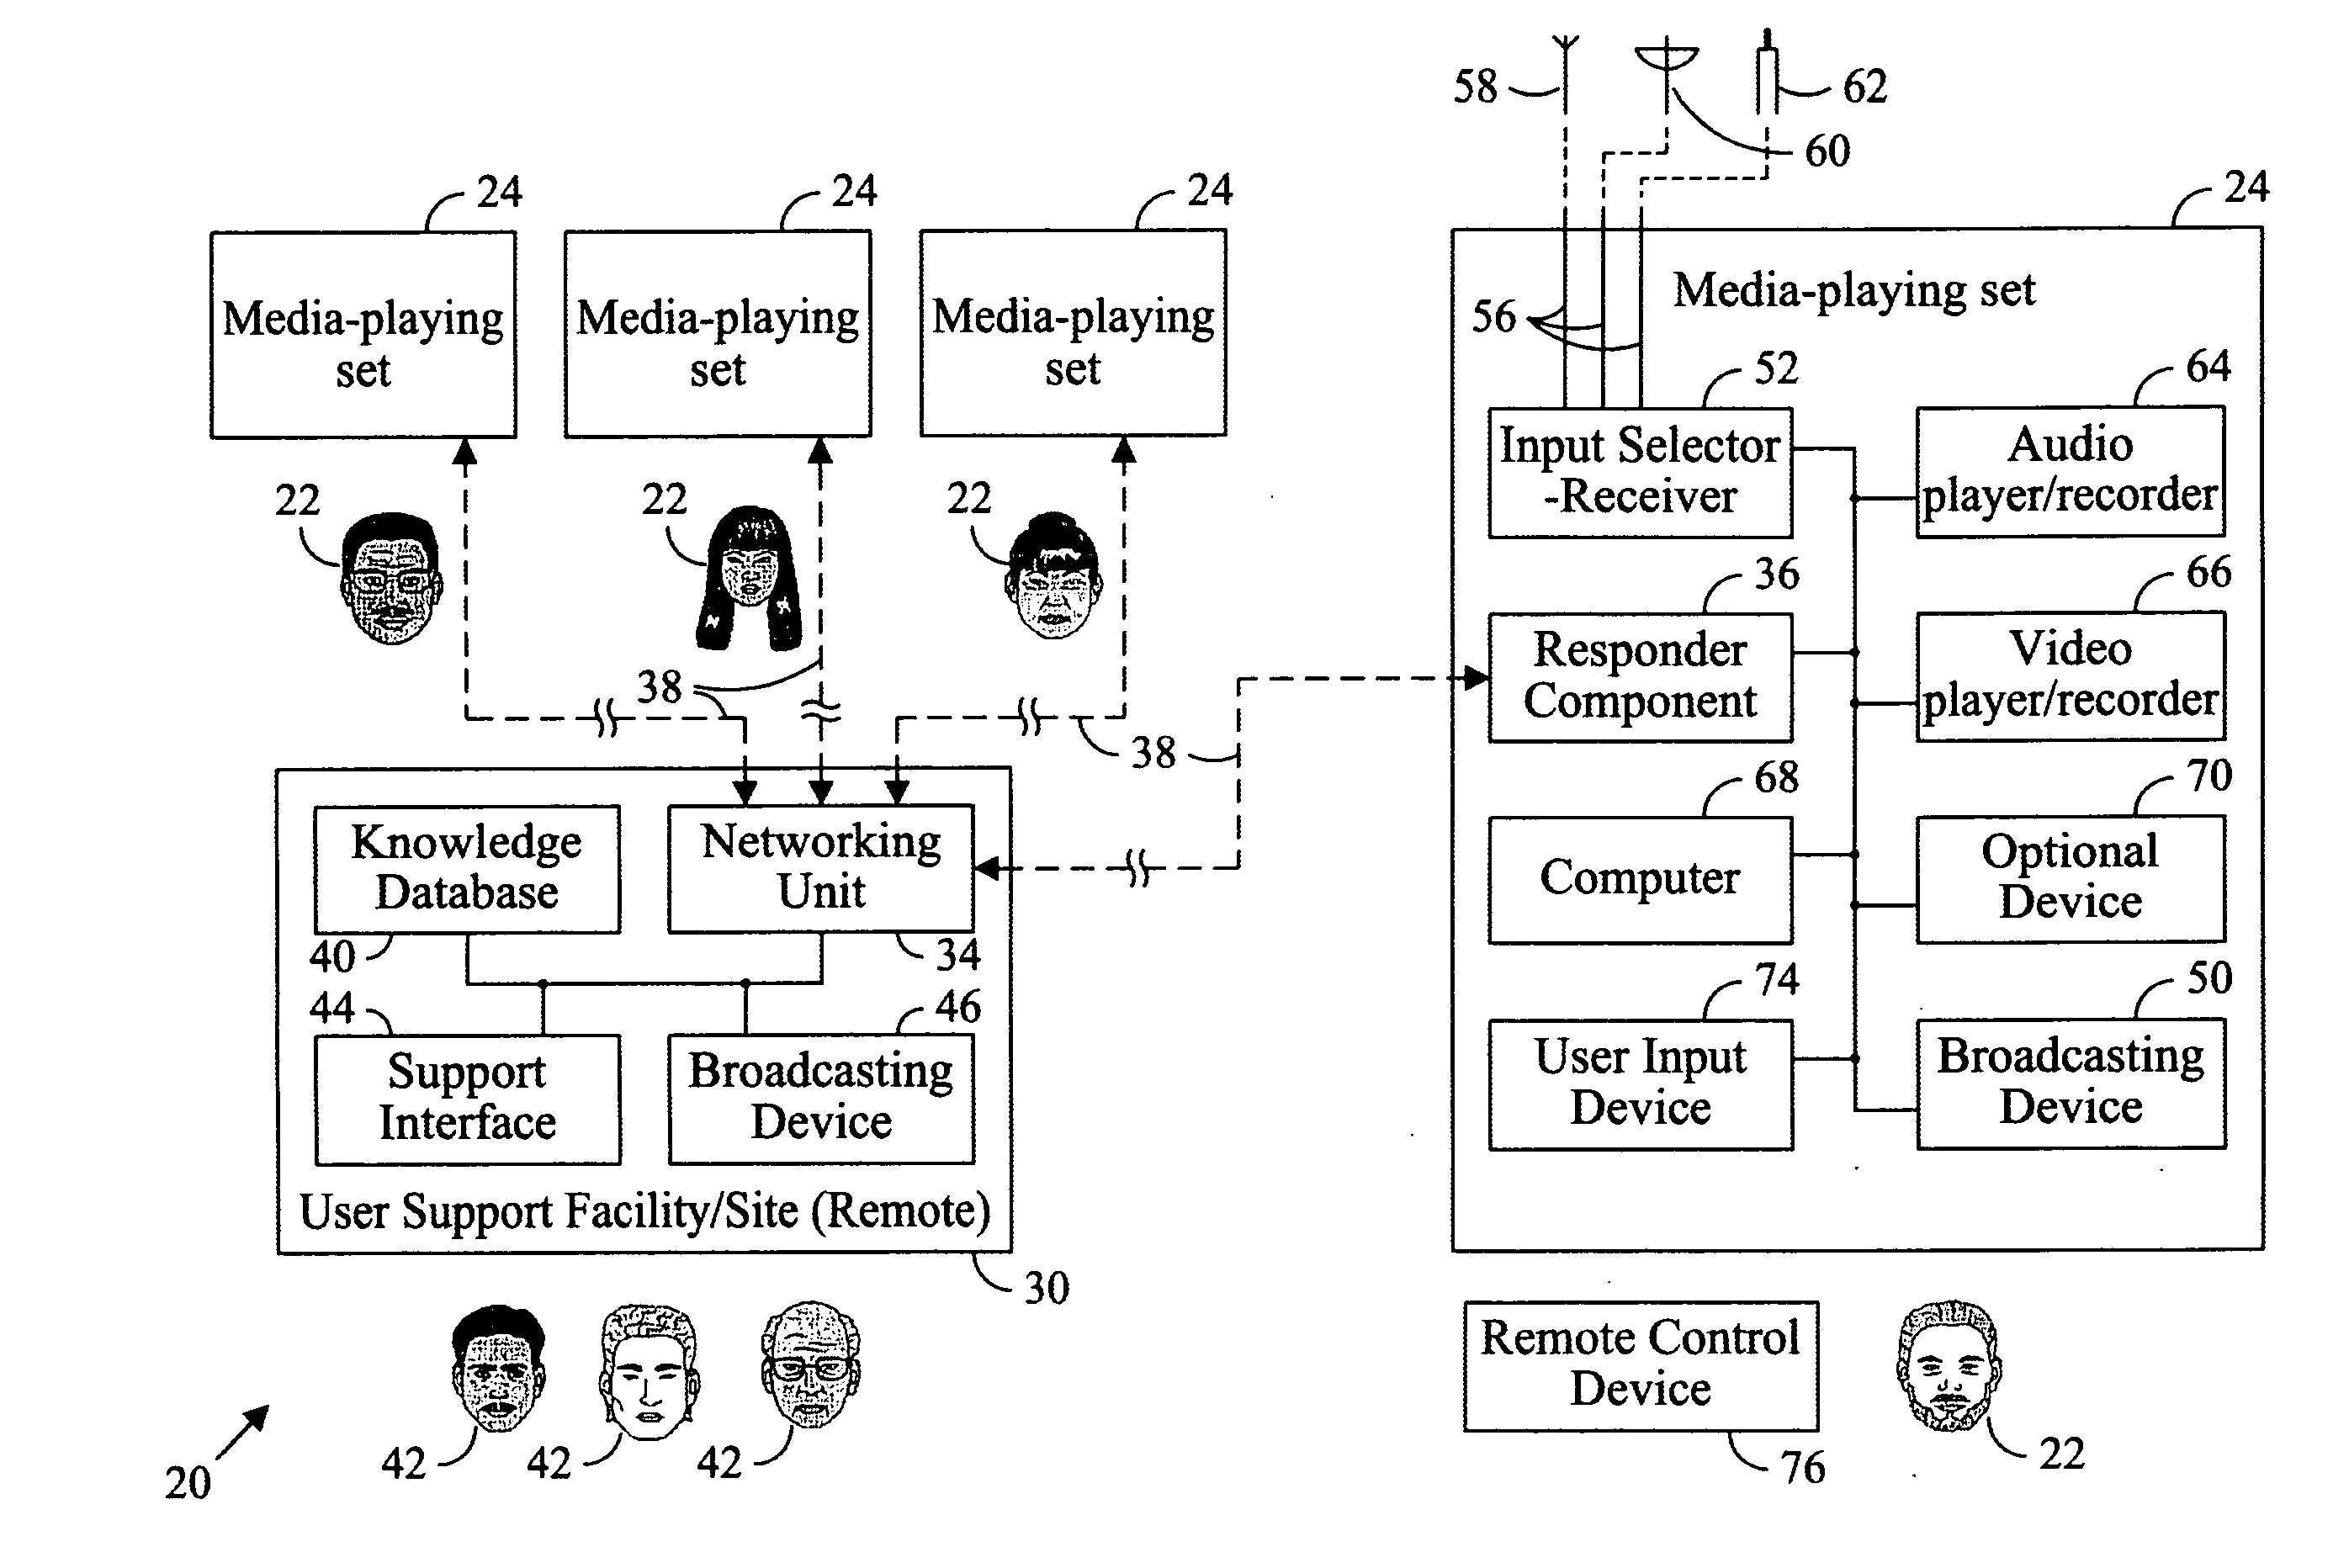 Method and system for configuring media-playing sets